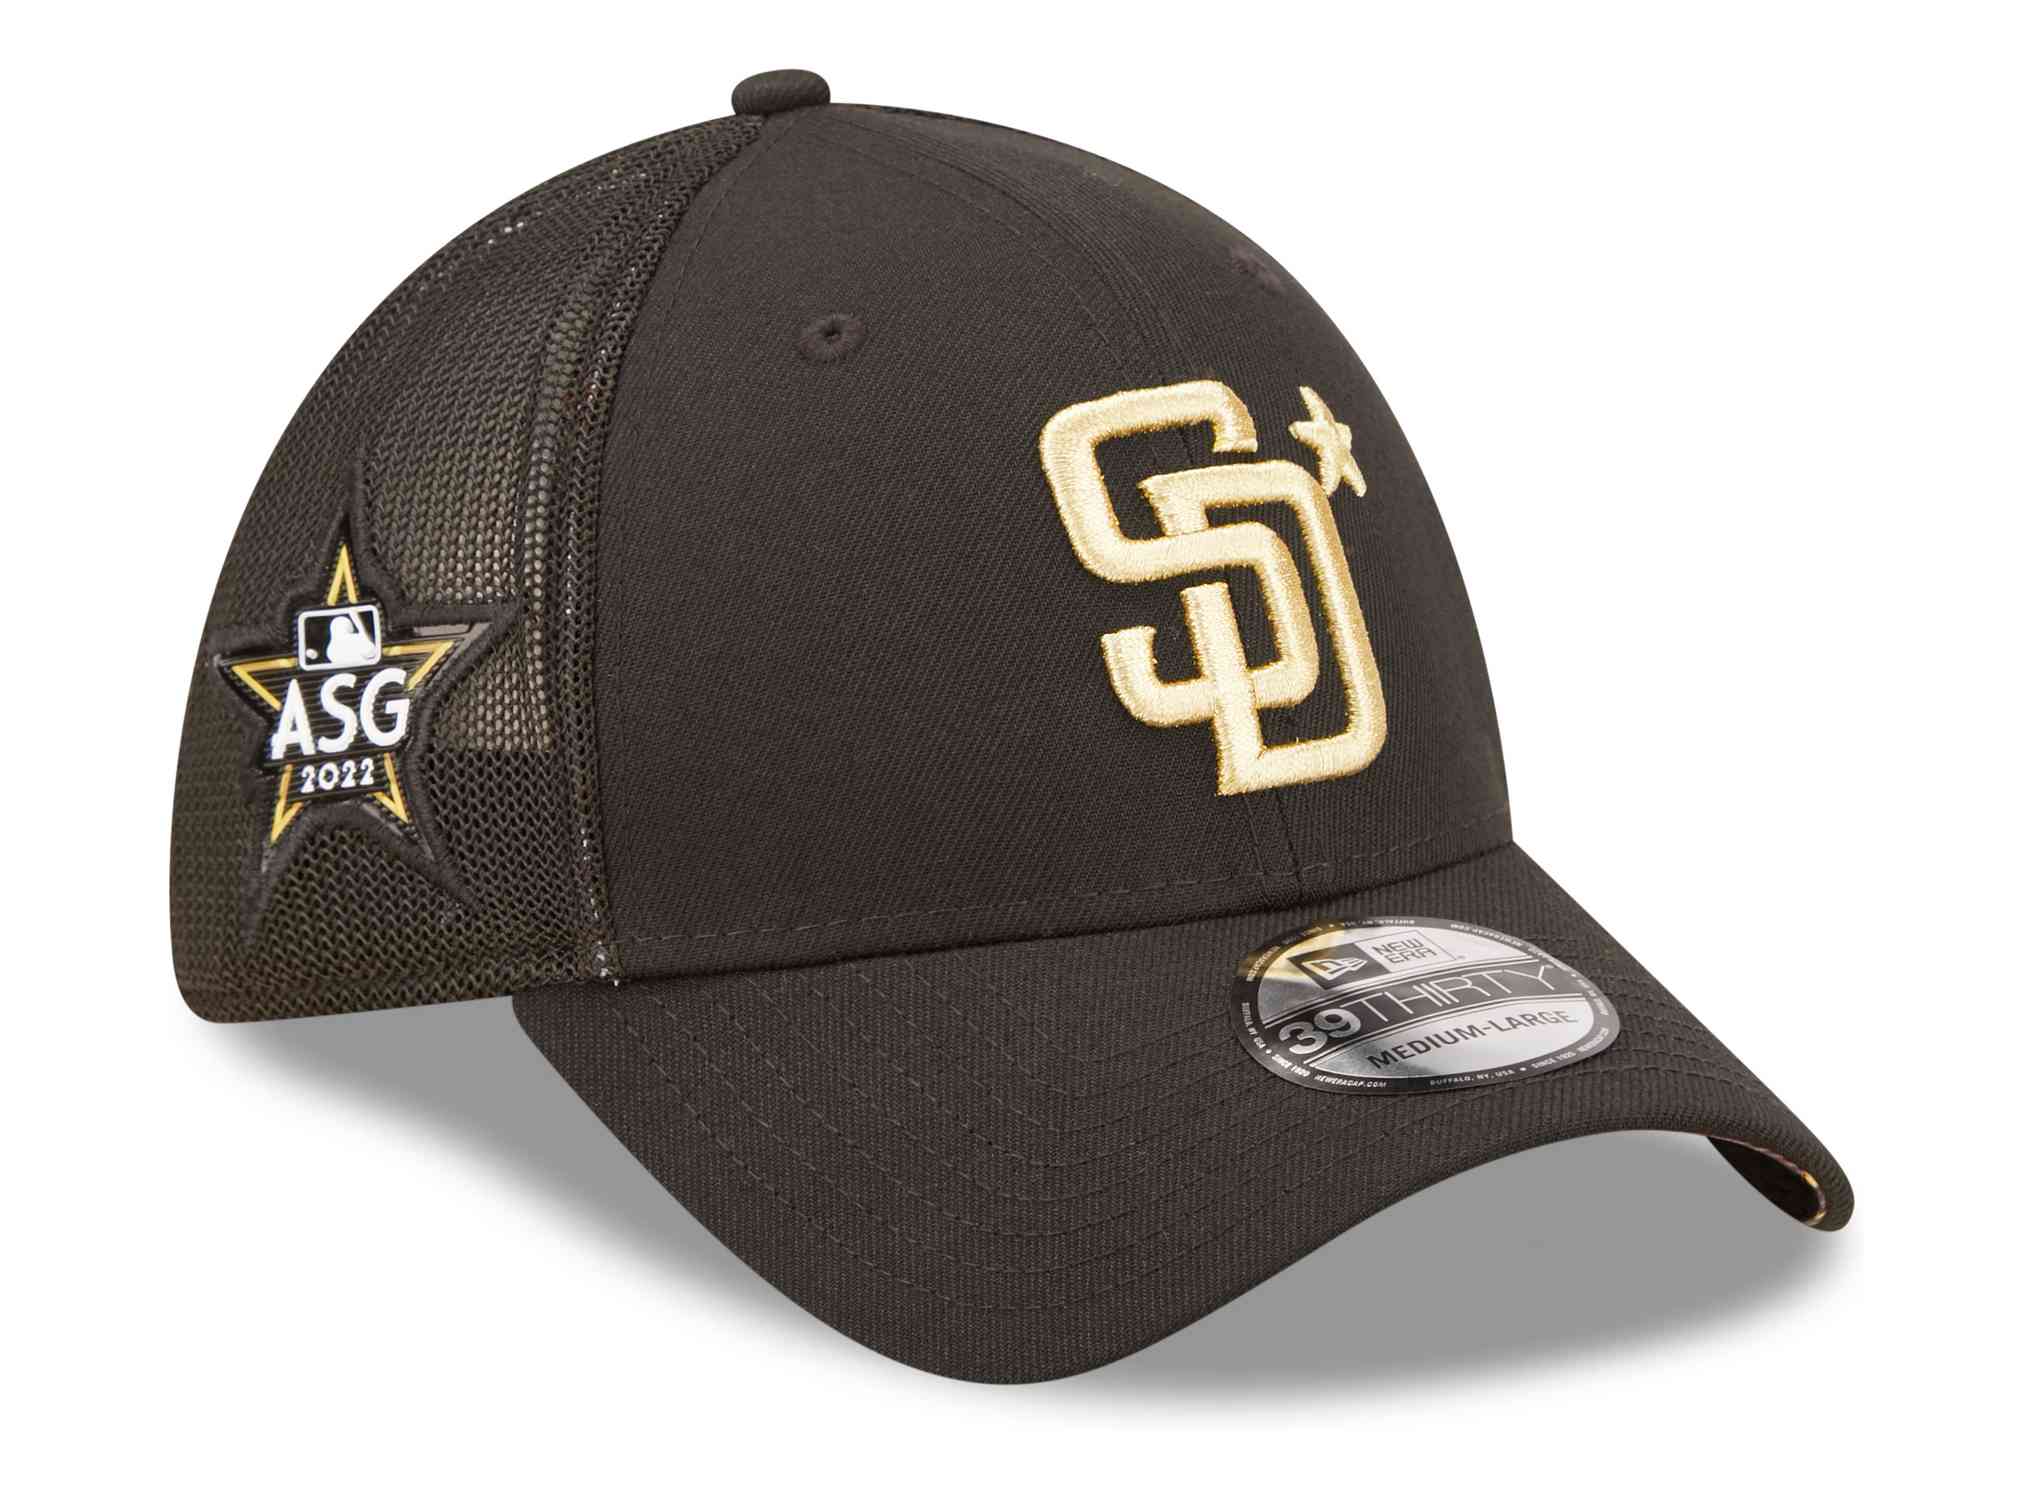 New Era - MLB San Diego Padres All Star Game Patch 39Thirty